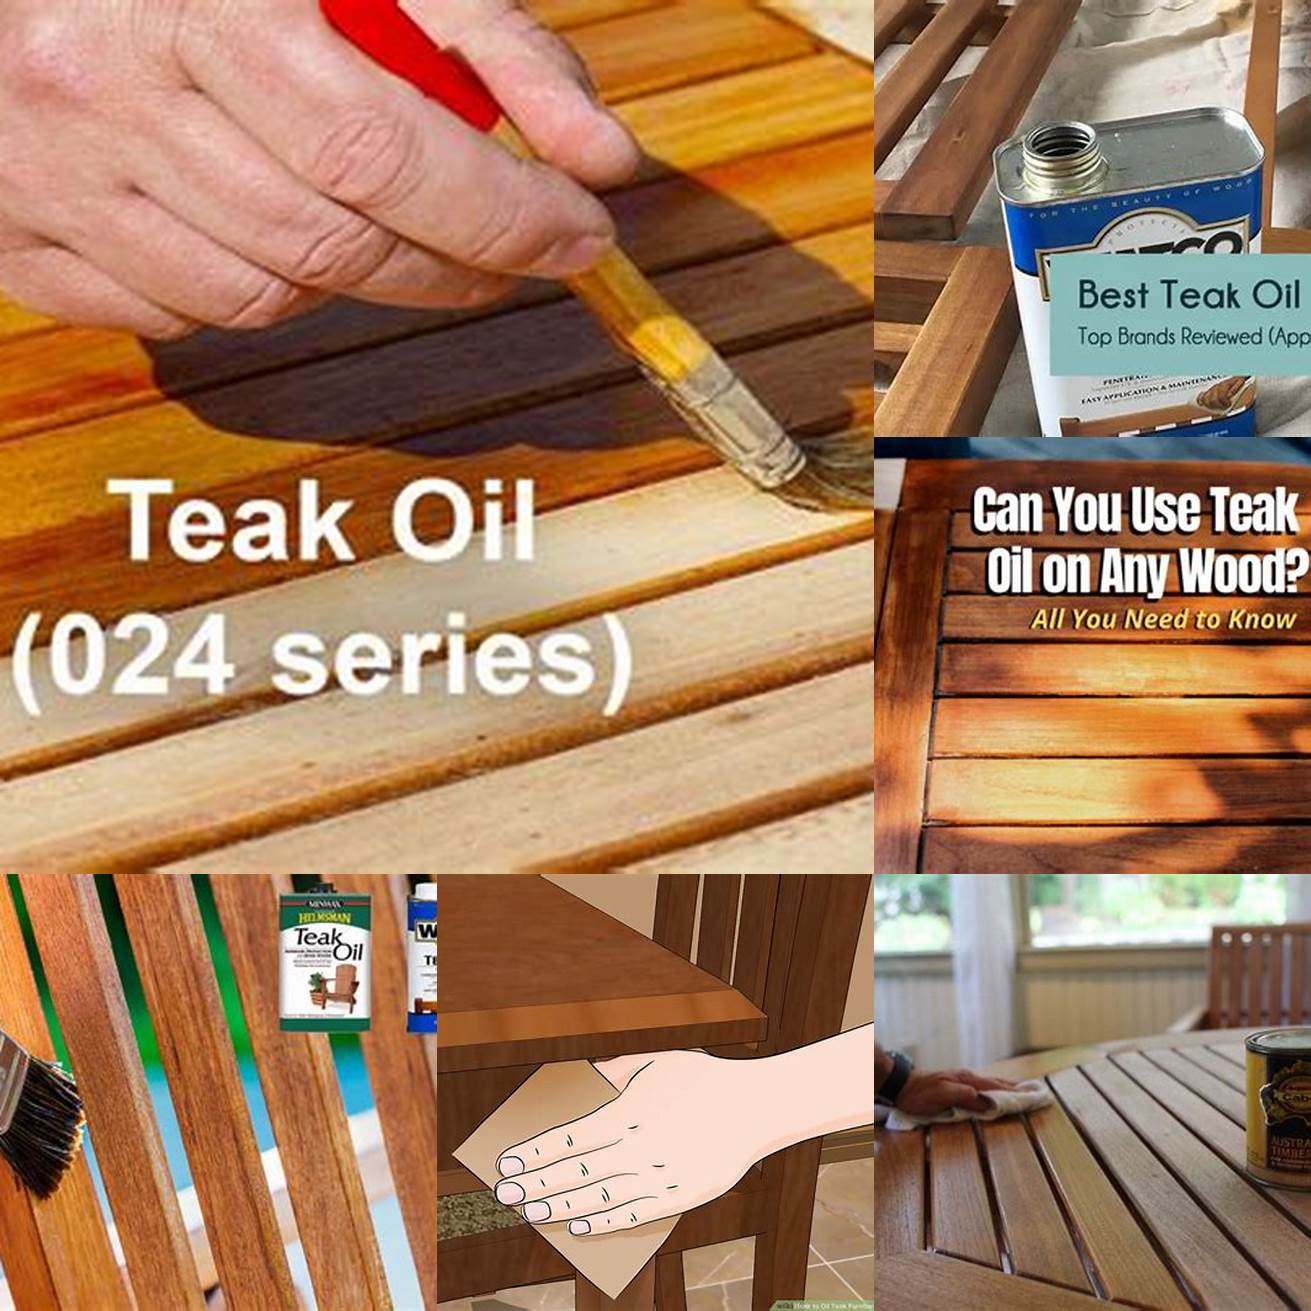 Always read the instructions carefully before using teak oil